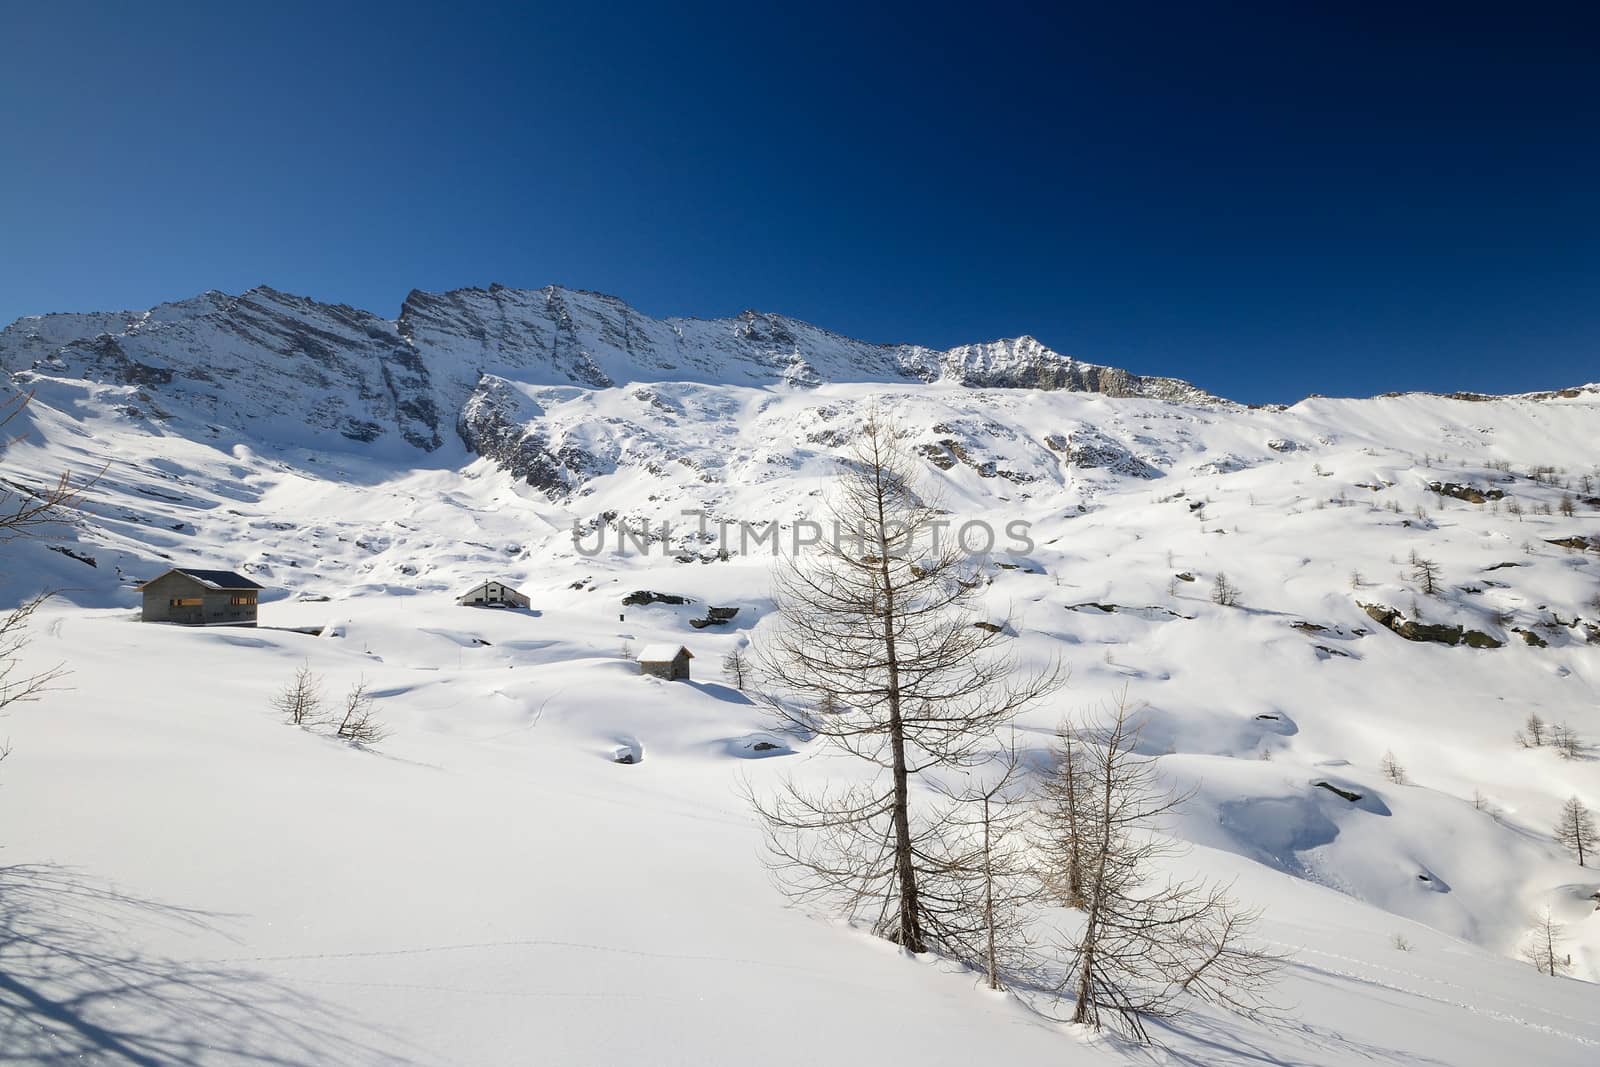 Candid off piste ski slope in scenic background of high mountain peaks, Gran Paradiso National Park, italian Alps